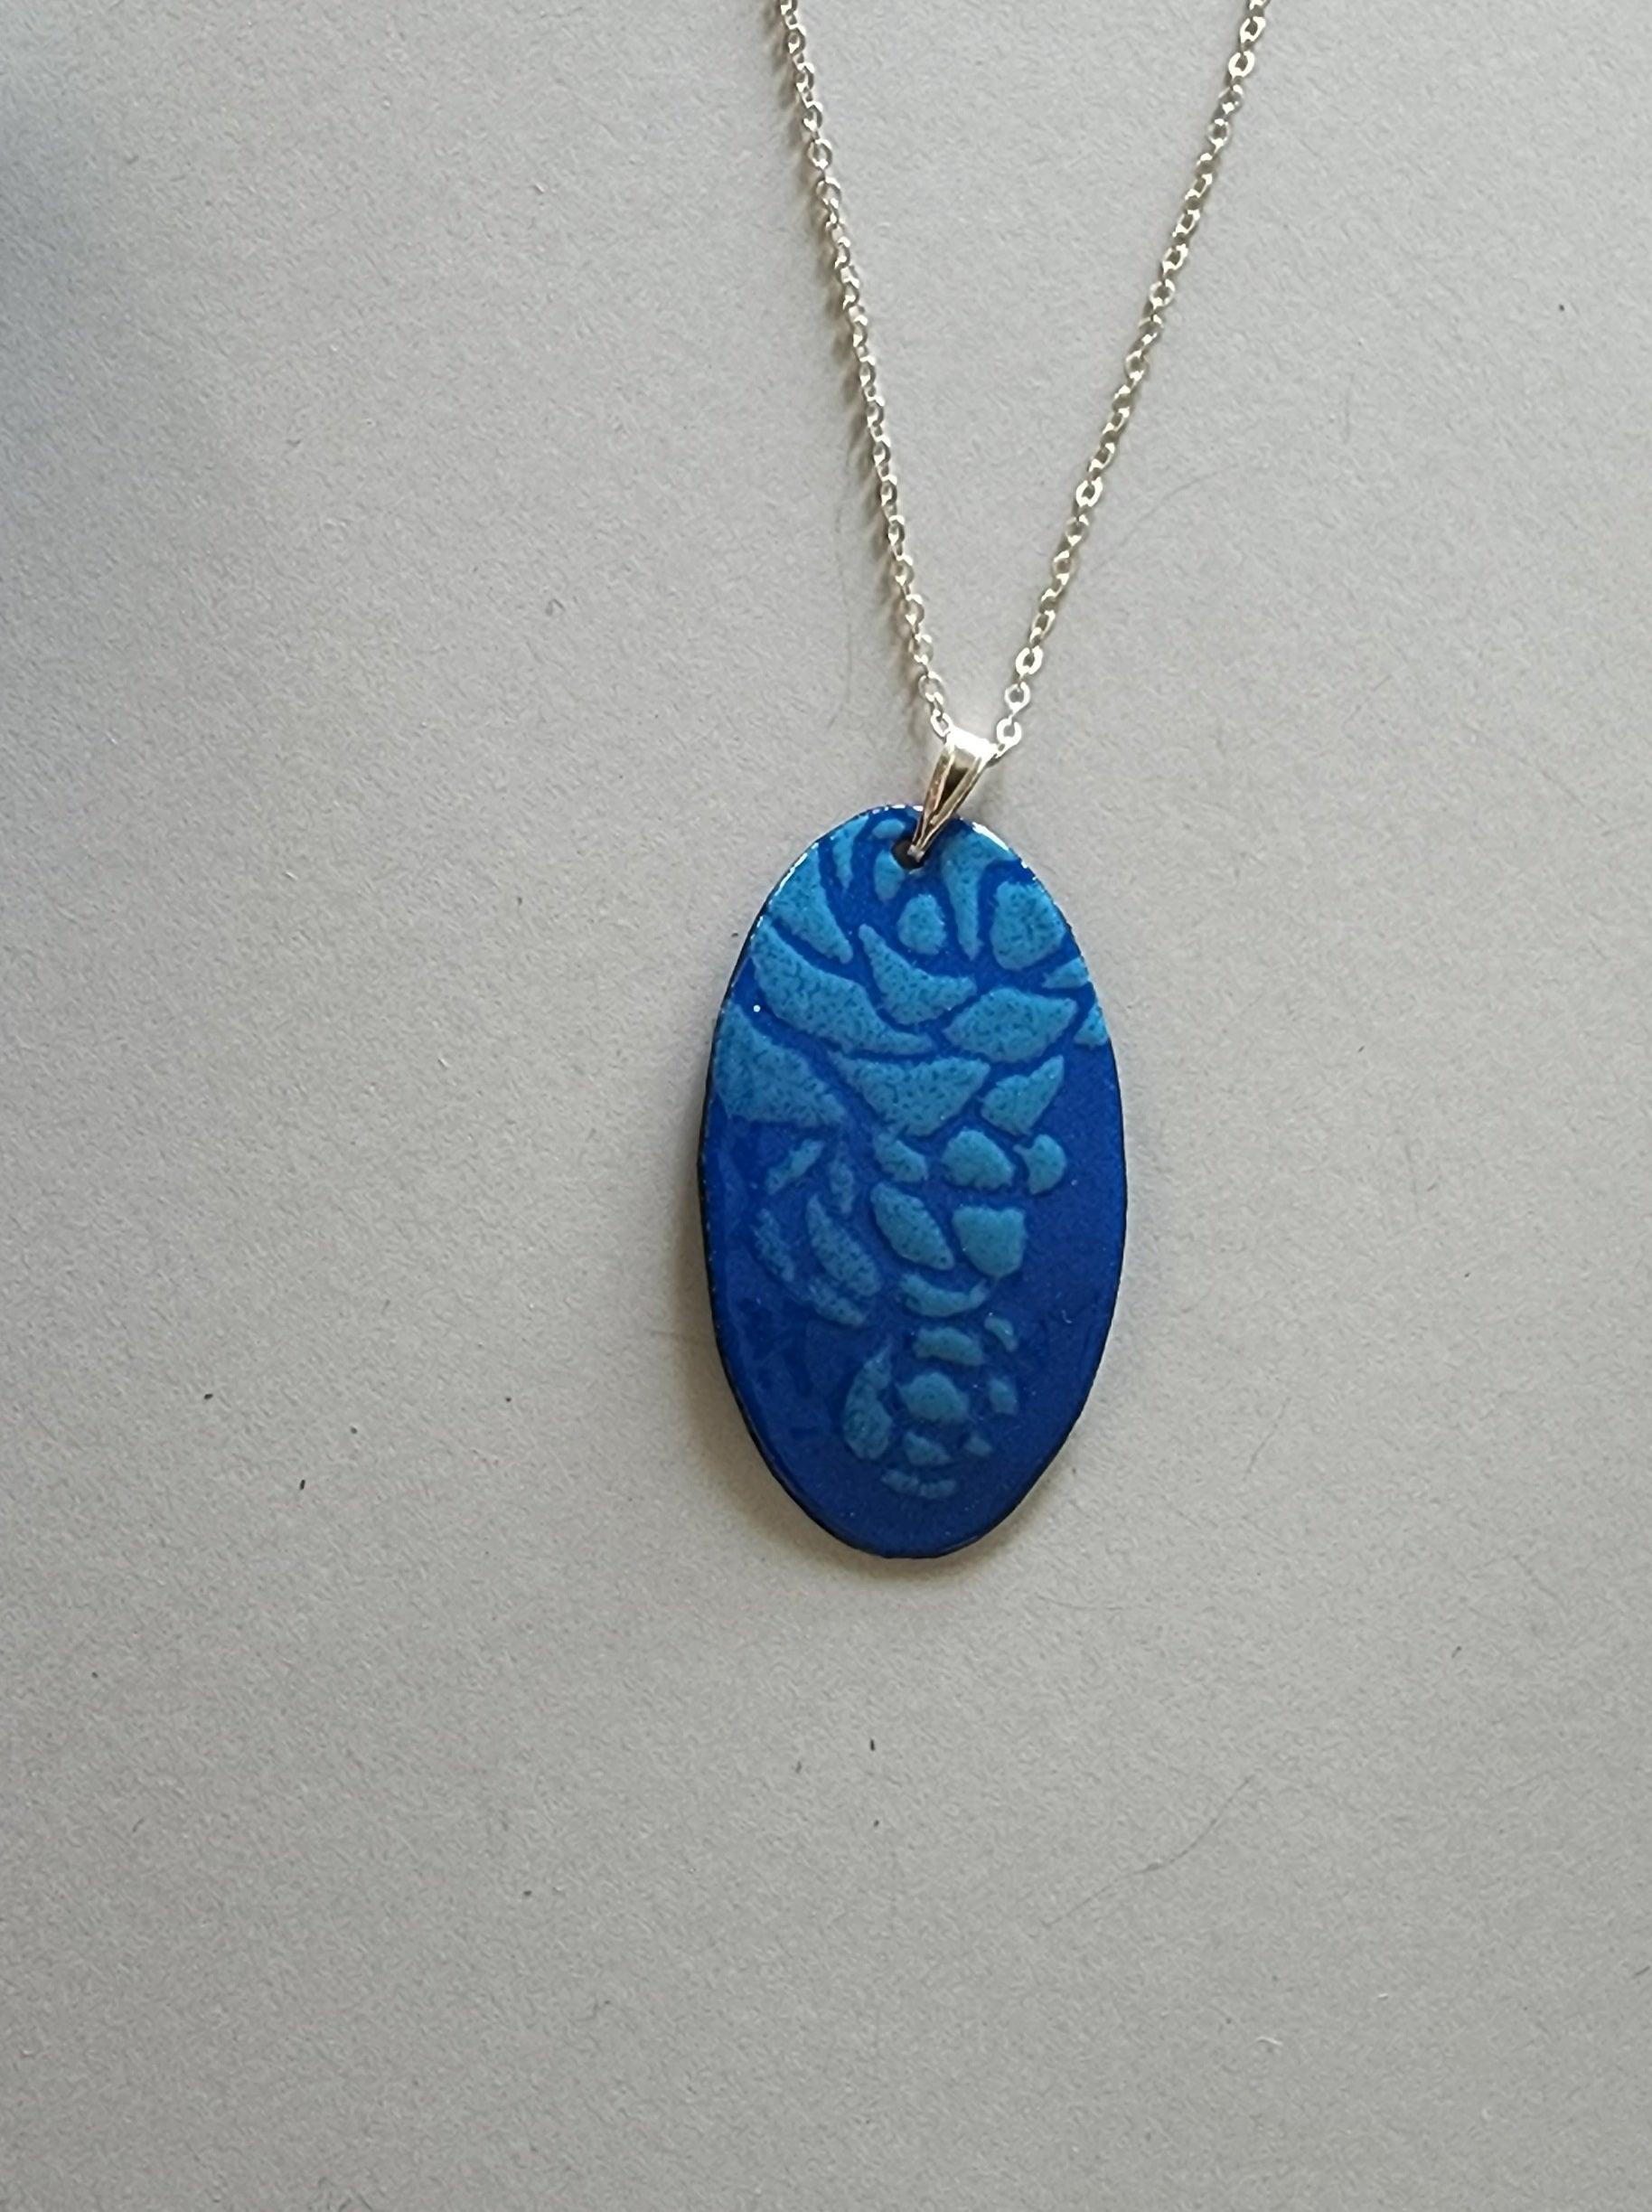 Handmade Womans Two Tone Blue Enameled Copper Oval Necklace with Raised Floral Pattern and Sterling Silver Chain - Gilded Heart Designs